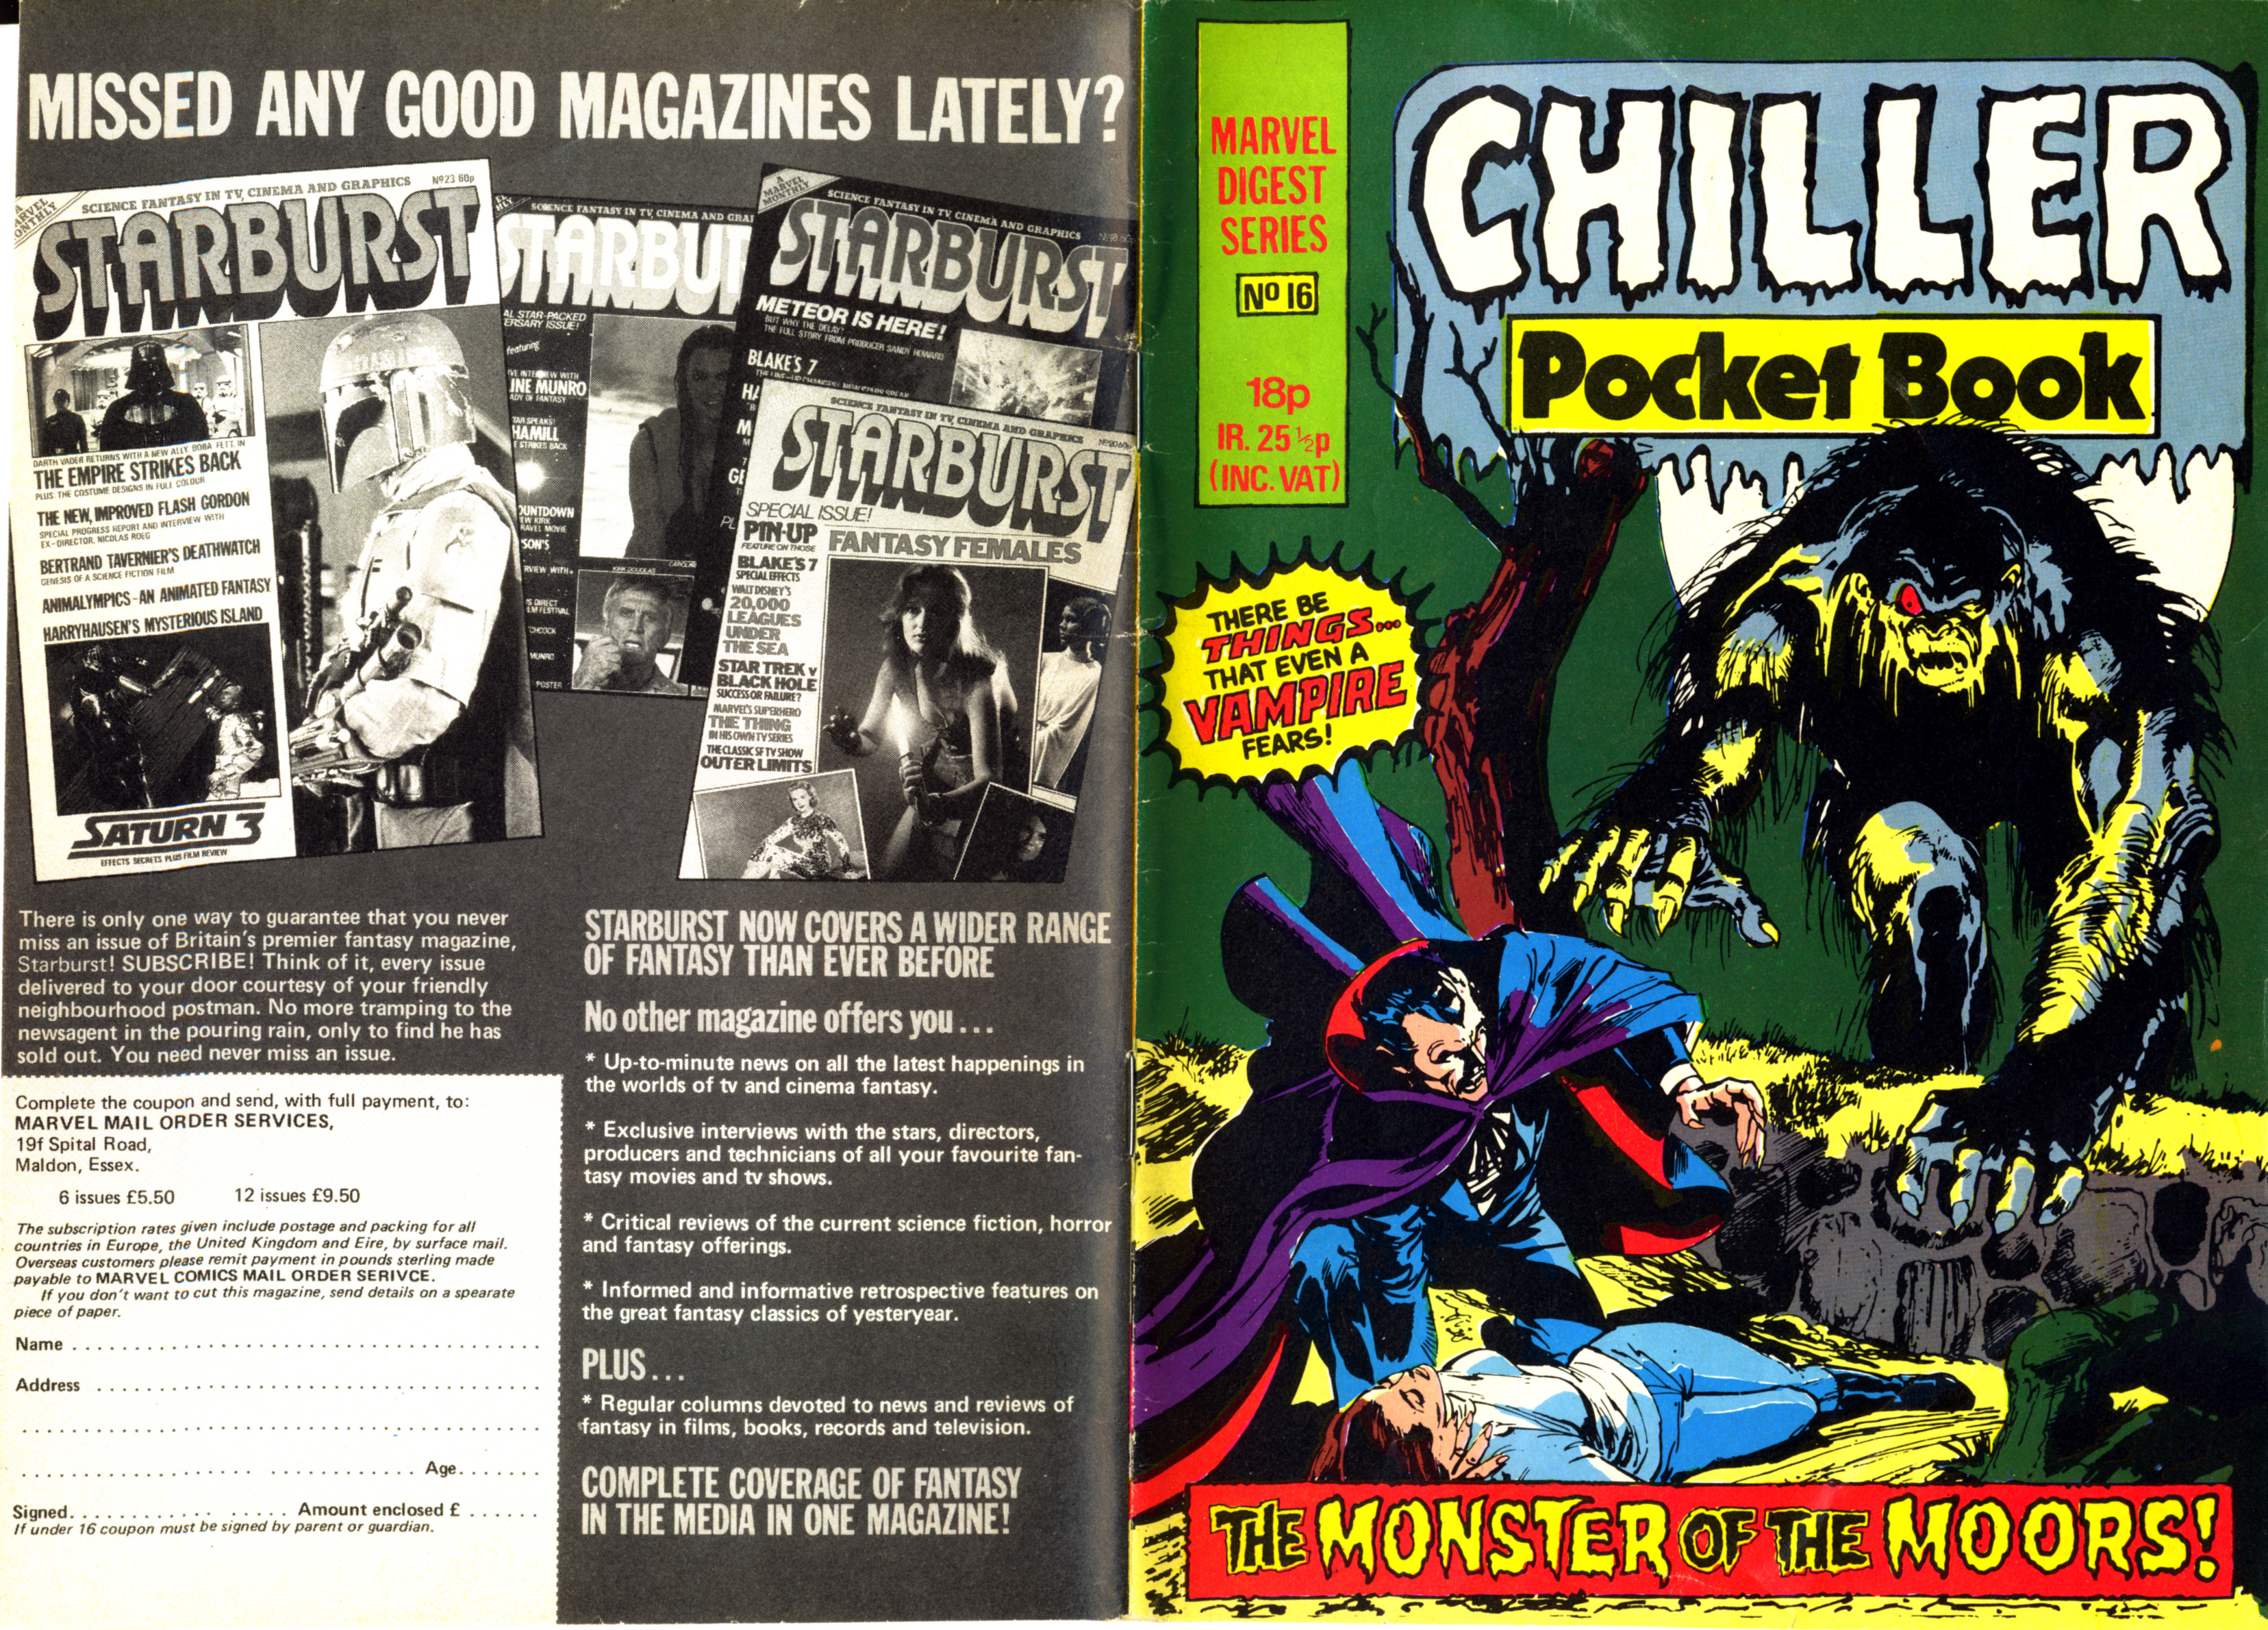 Read online Chiller Pocket Book comic -  Issue #16 - 2